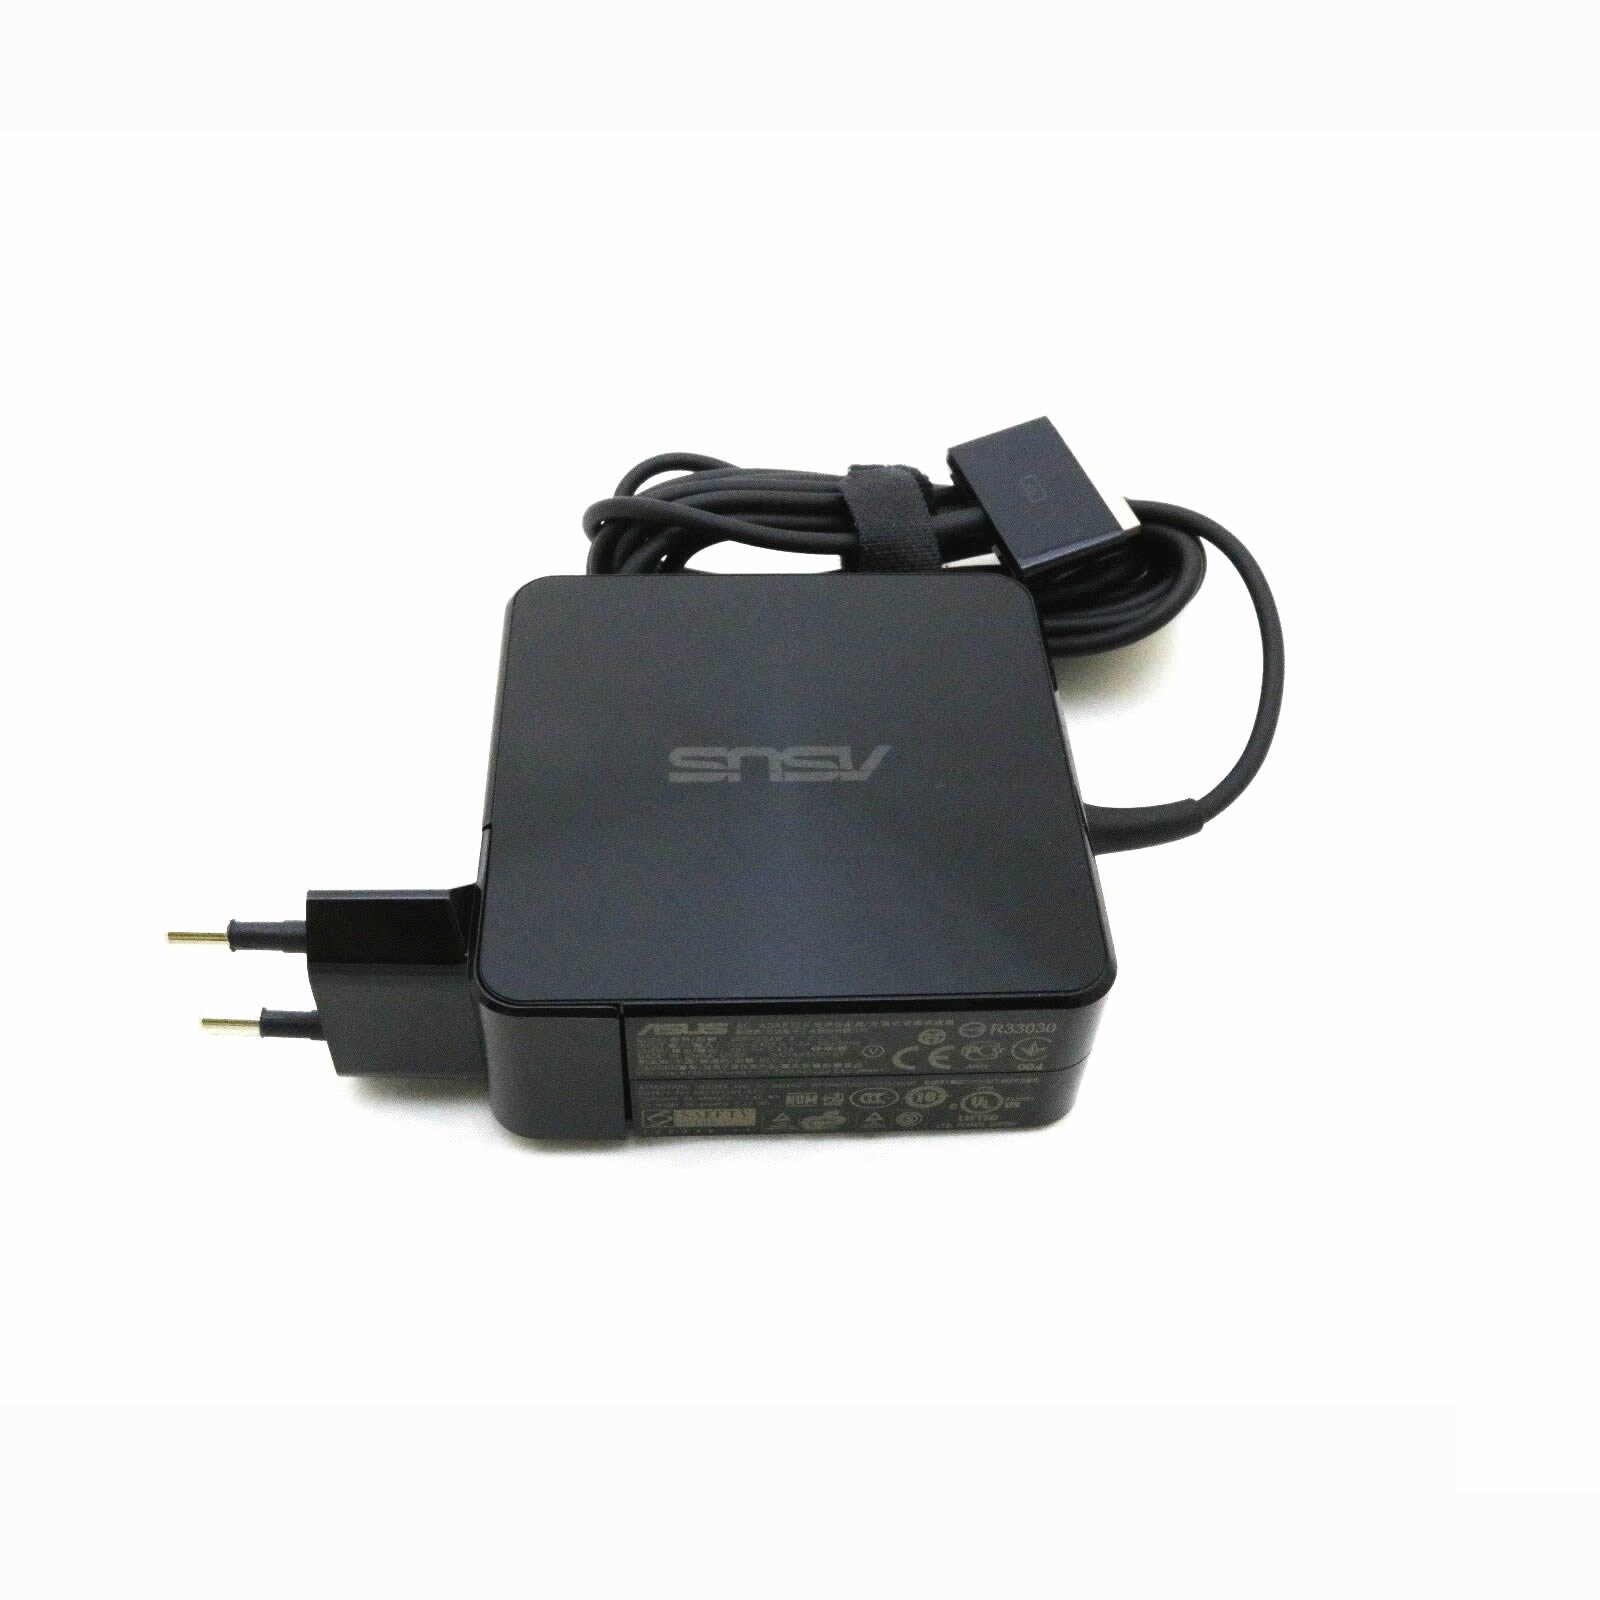 Asus 19V 3.42A 65W ADP-65AW,ADP-65AW A Original Ac Adapter for Asus TX300, TX300K, TX300CA